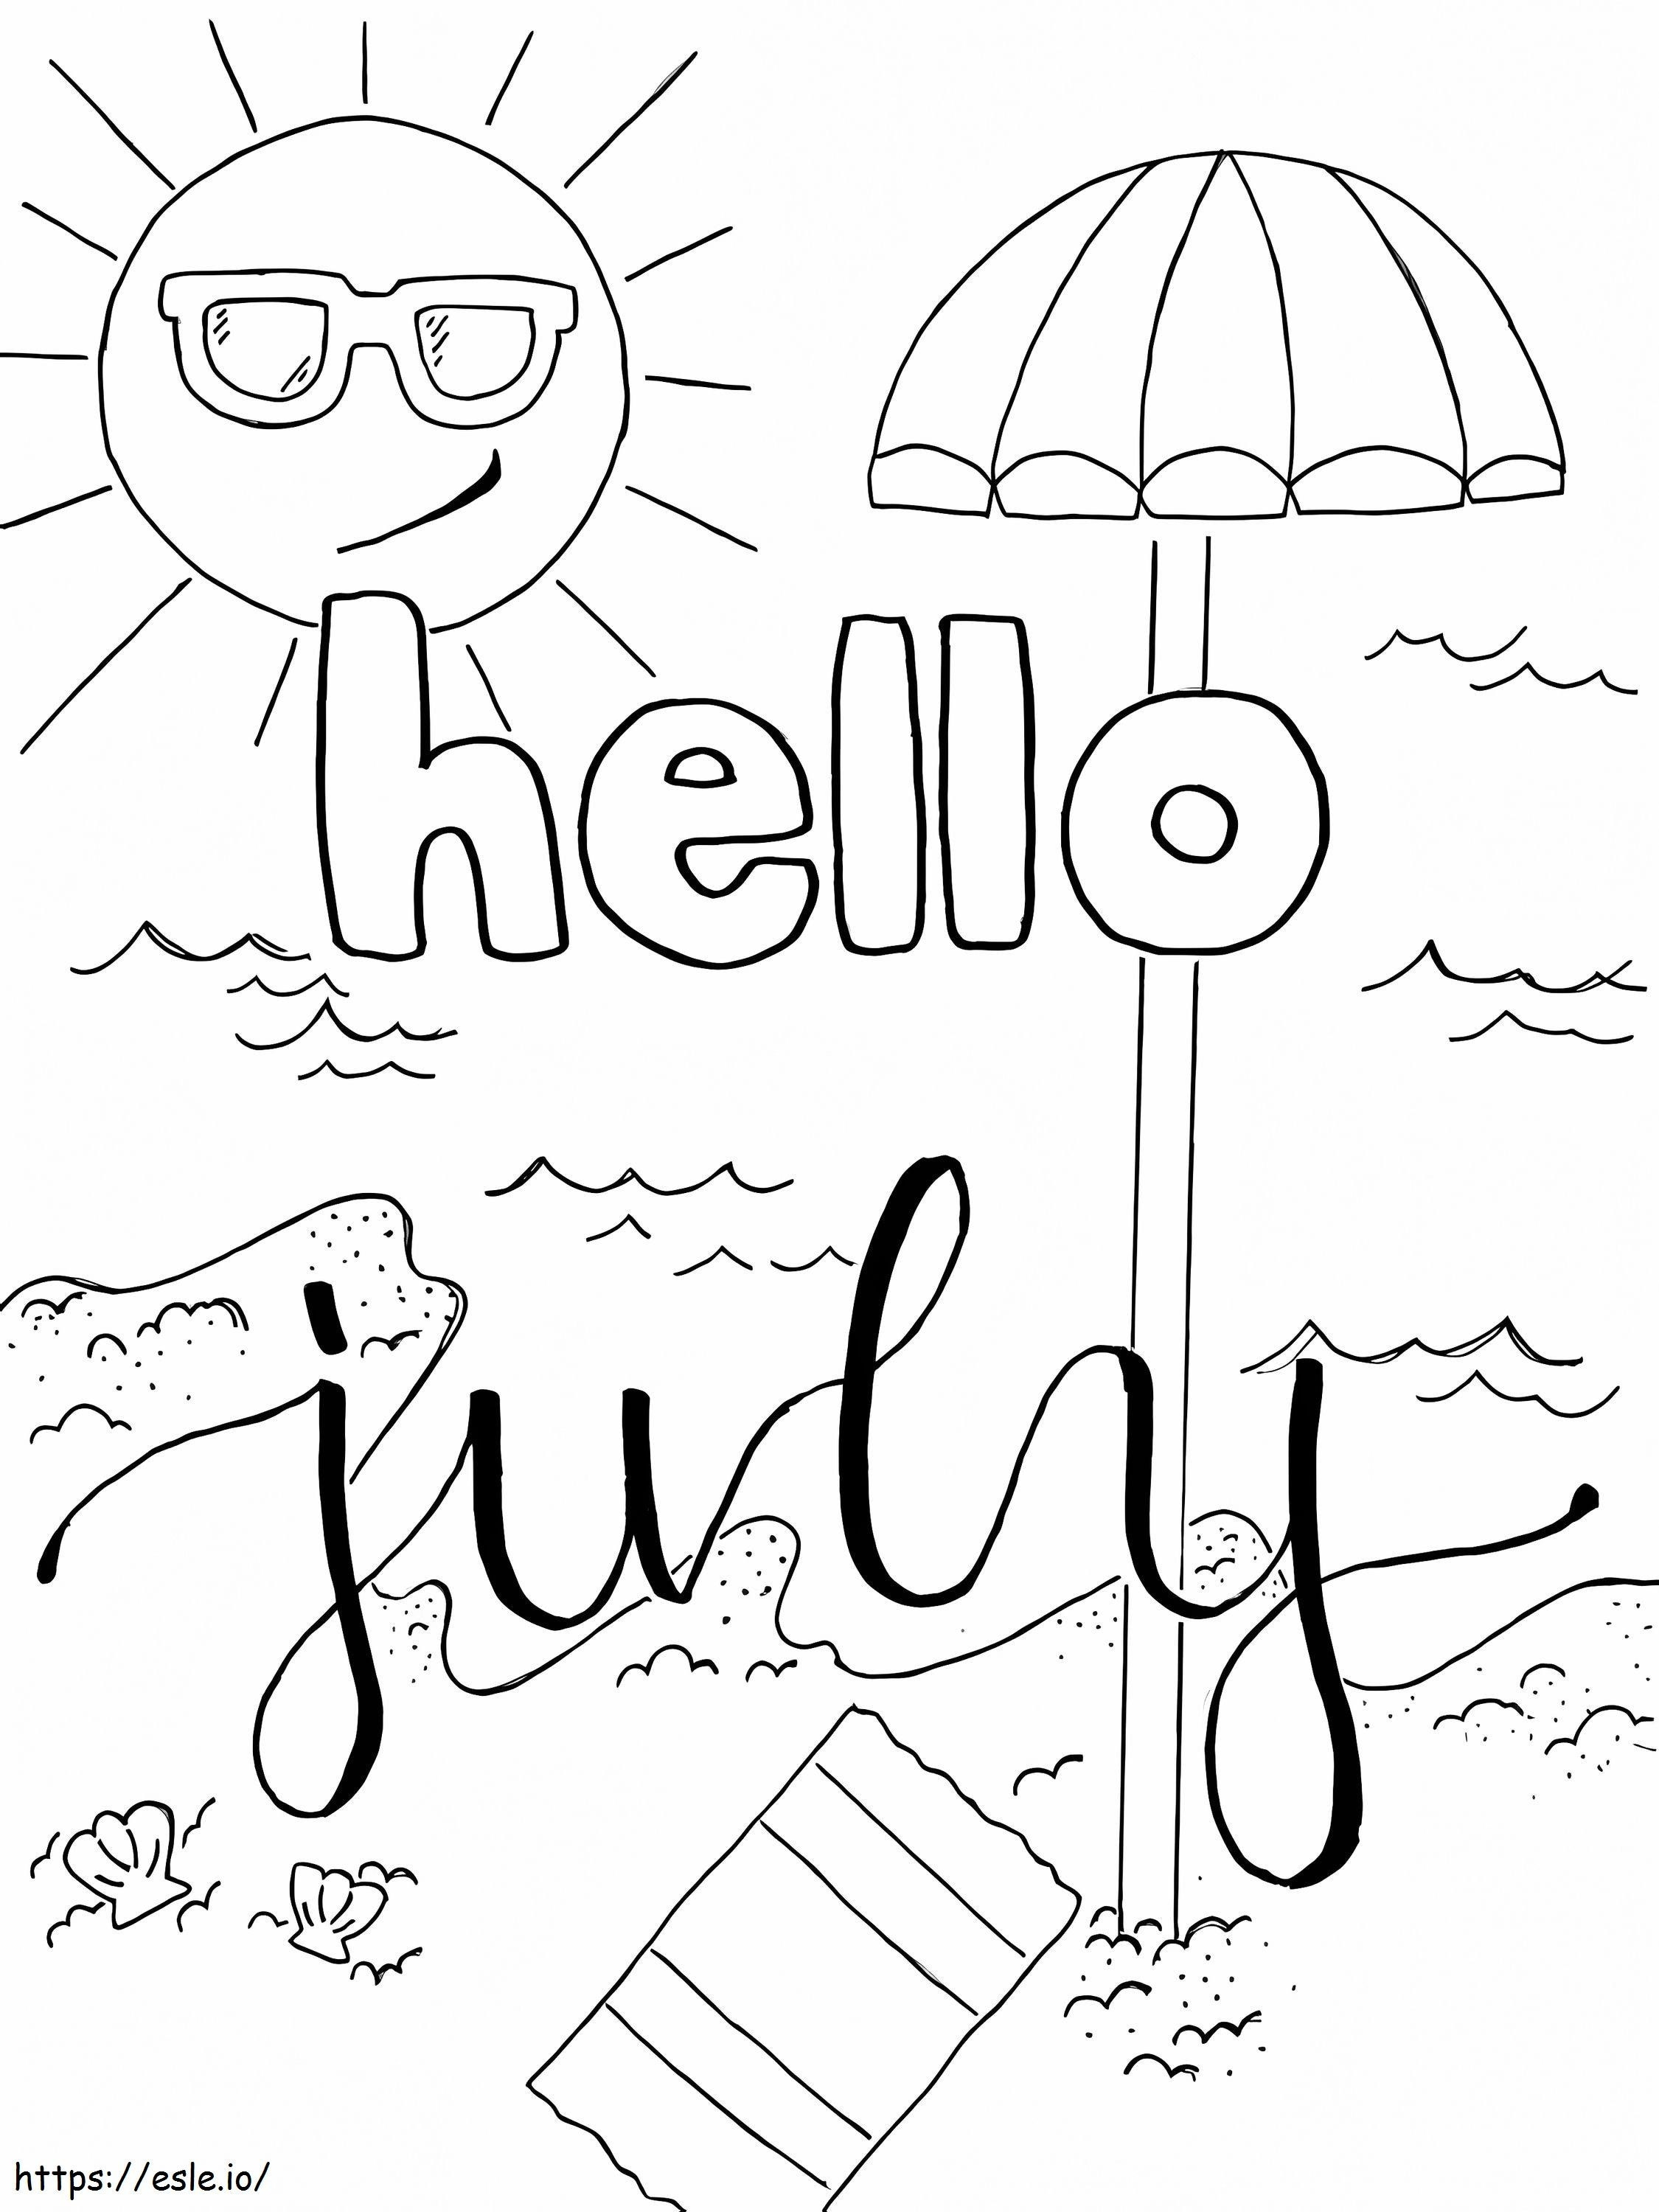 Hello July coloring page